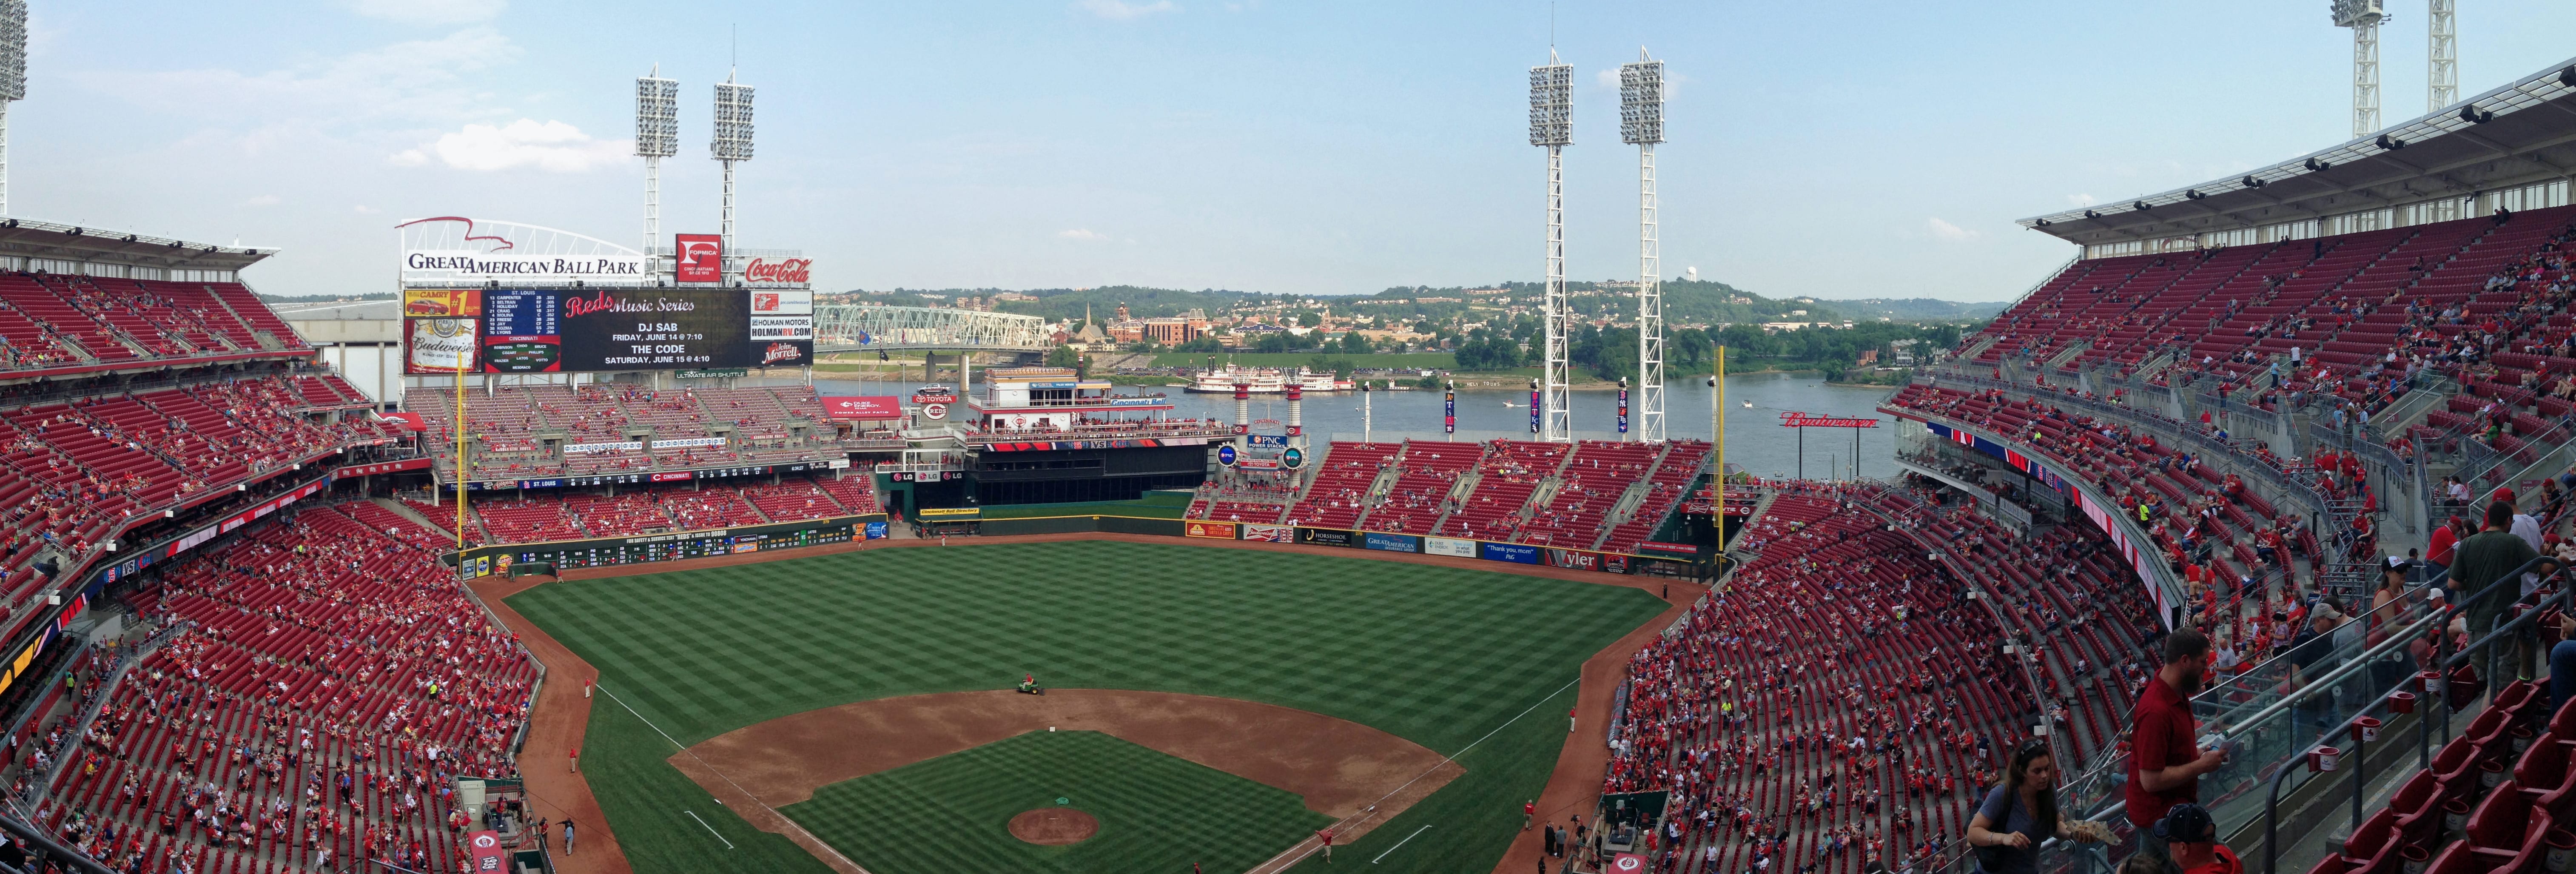 Great American Ballpark Parking Guide Rates, Maps, Tips